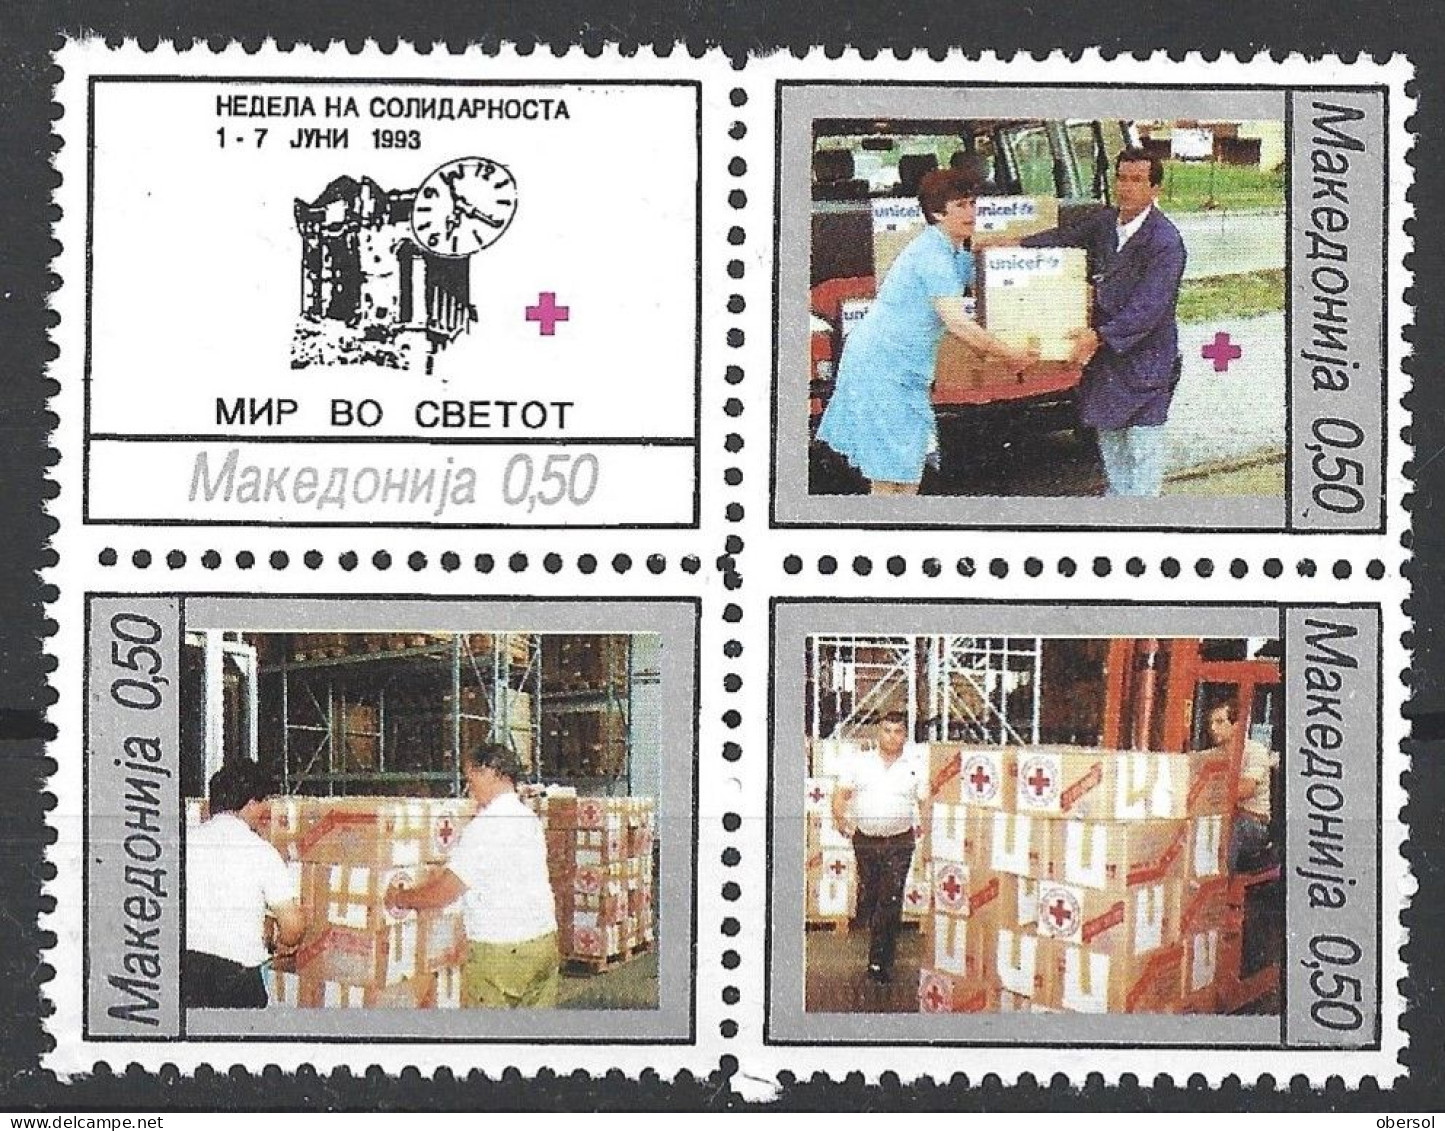 Macedonia 1993 Red Cross Solidarity Complete Block Of Four MNH (2) - Macedonia Del Nord